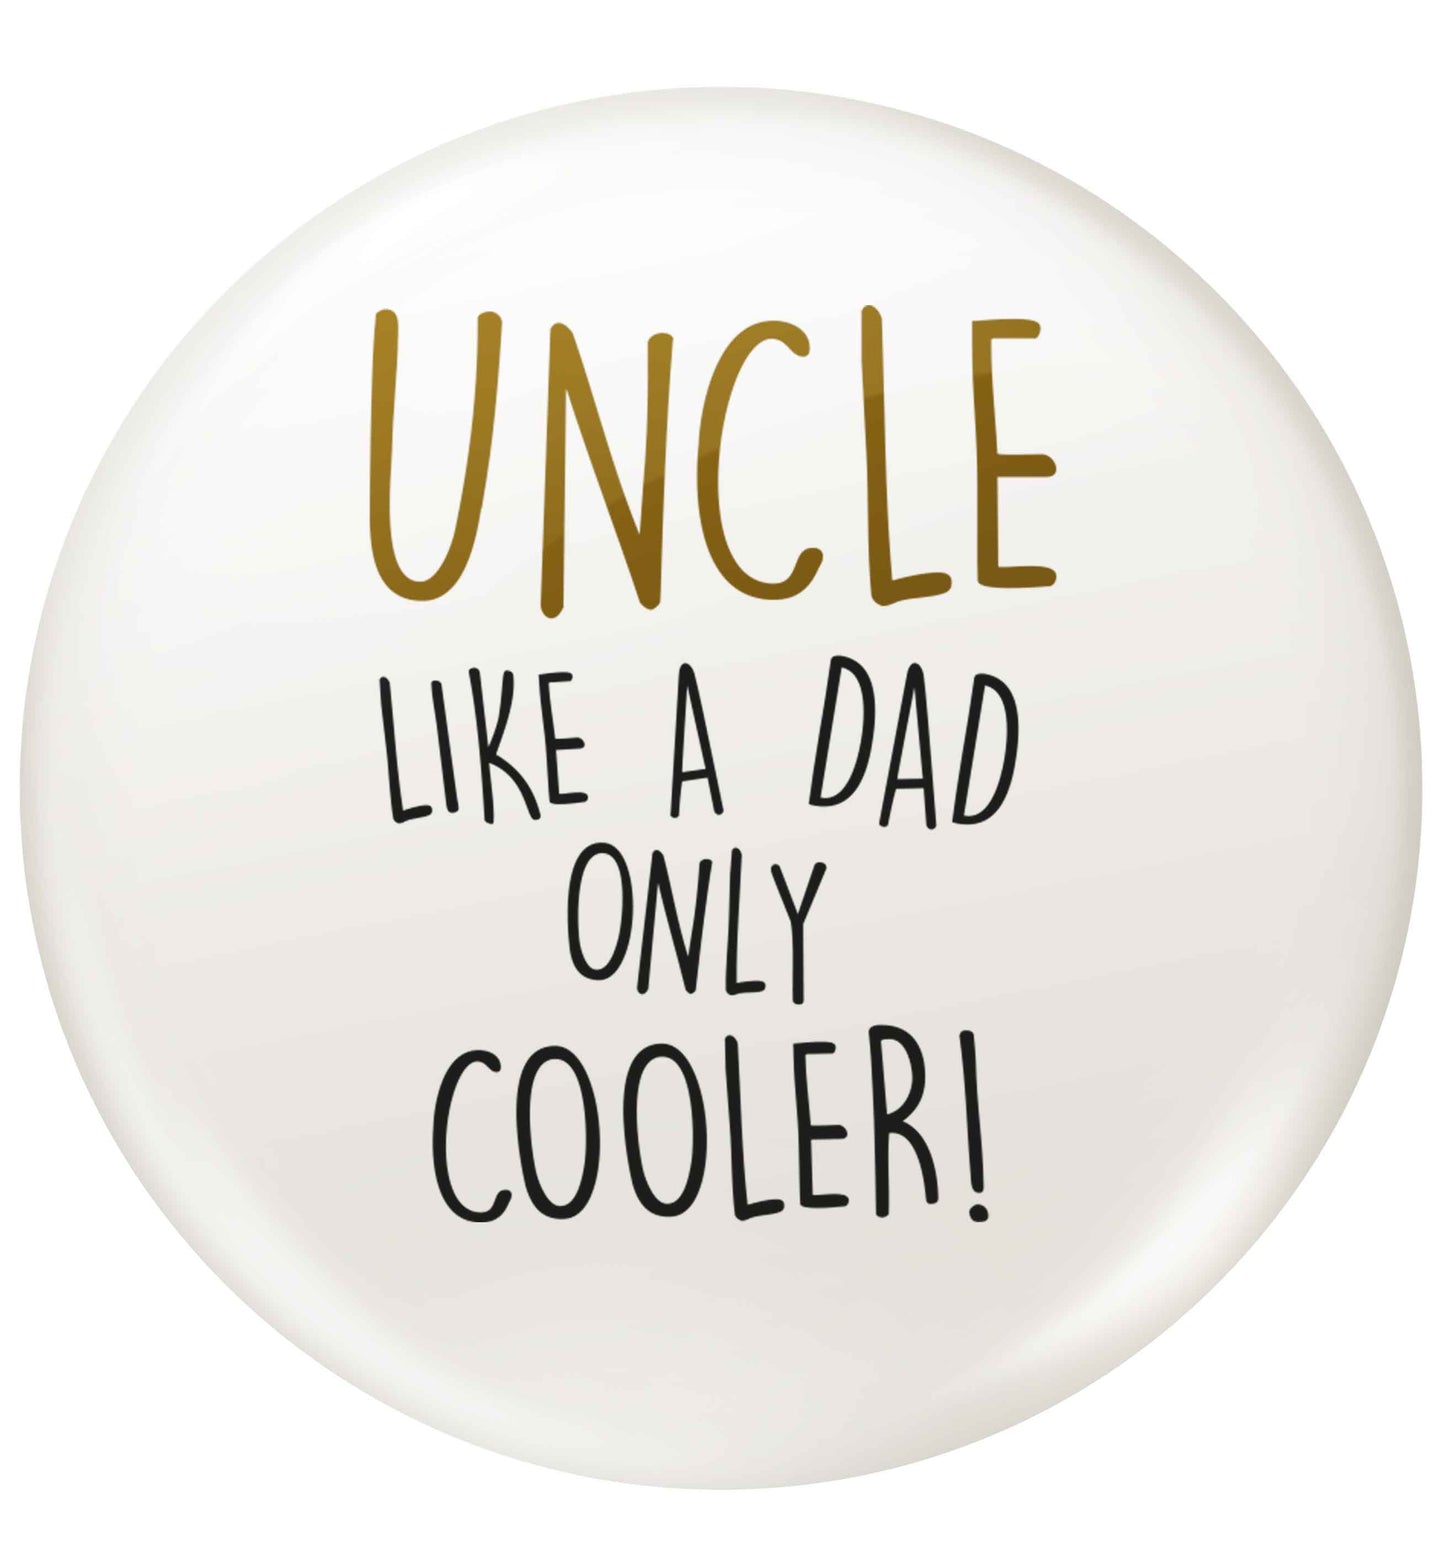 Uncle like a dad only cooler small 25mm Pin badge